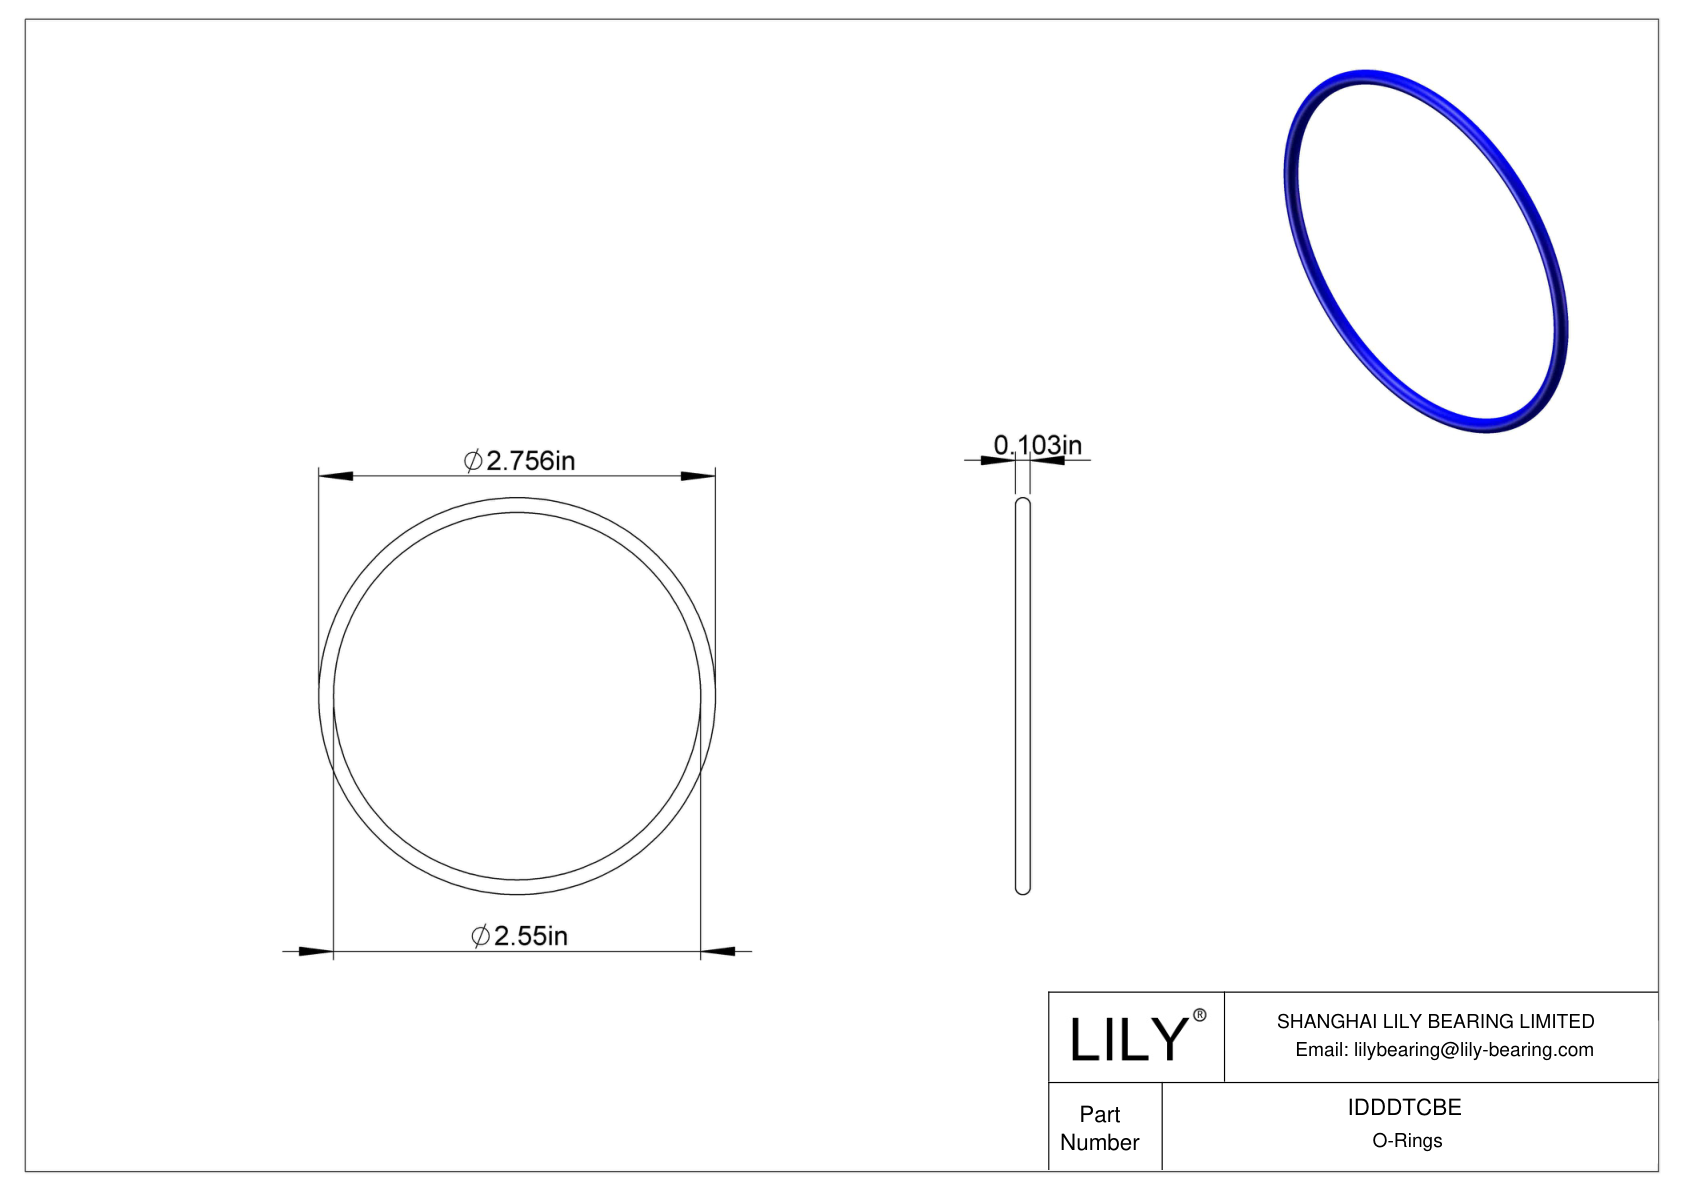 IDDDTCBE Chemical Resistant O-rings Round cad drawing